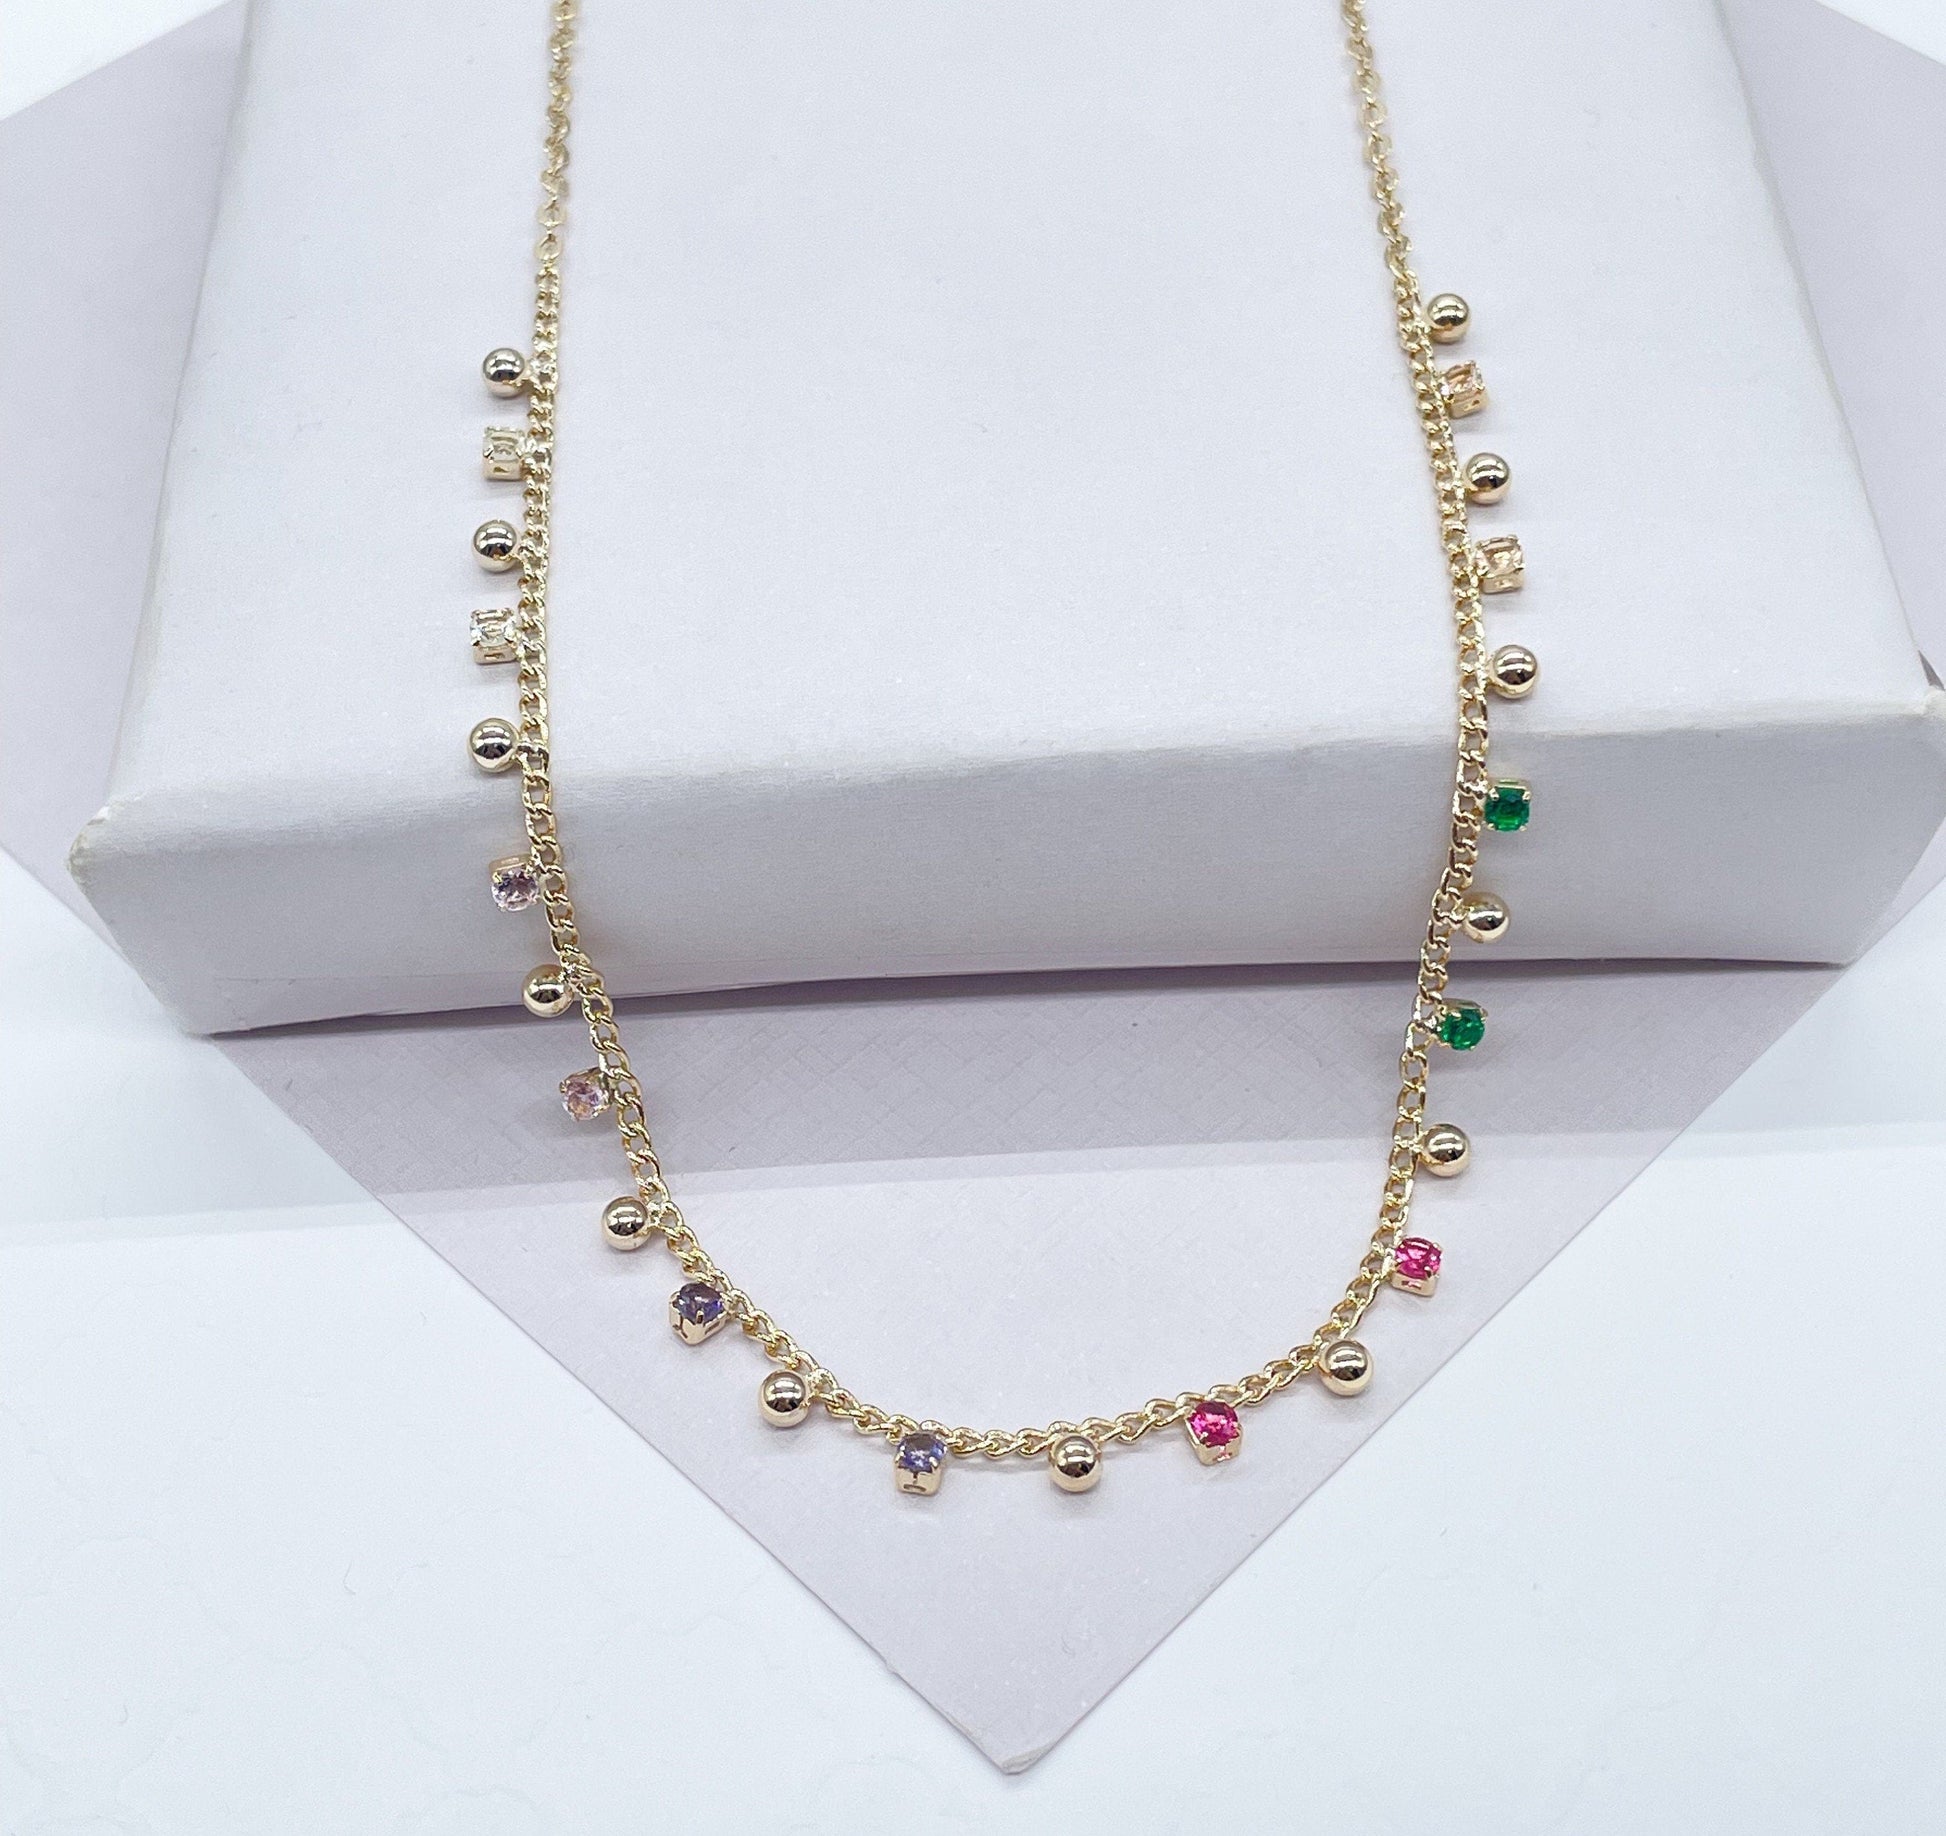 18k Gold Filled thin bead and colorful gem choker